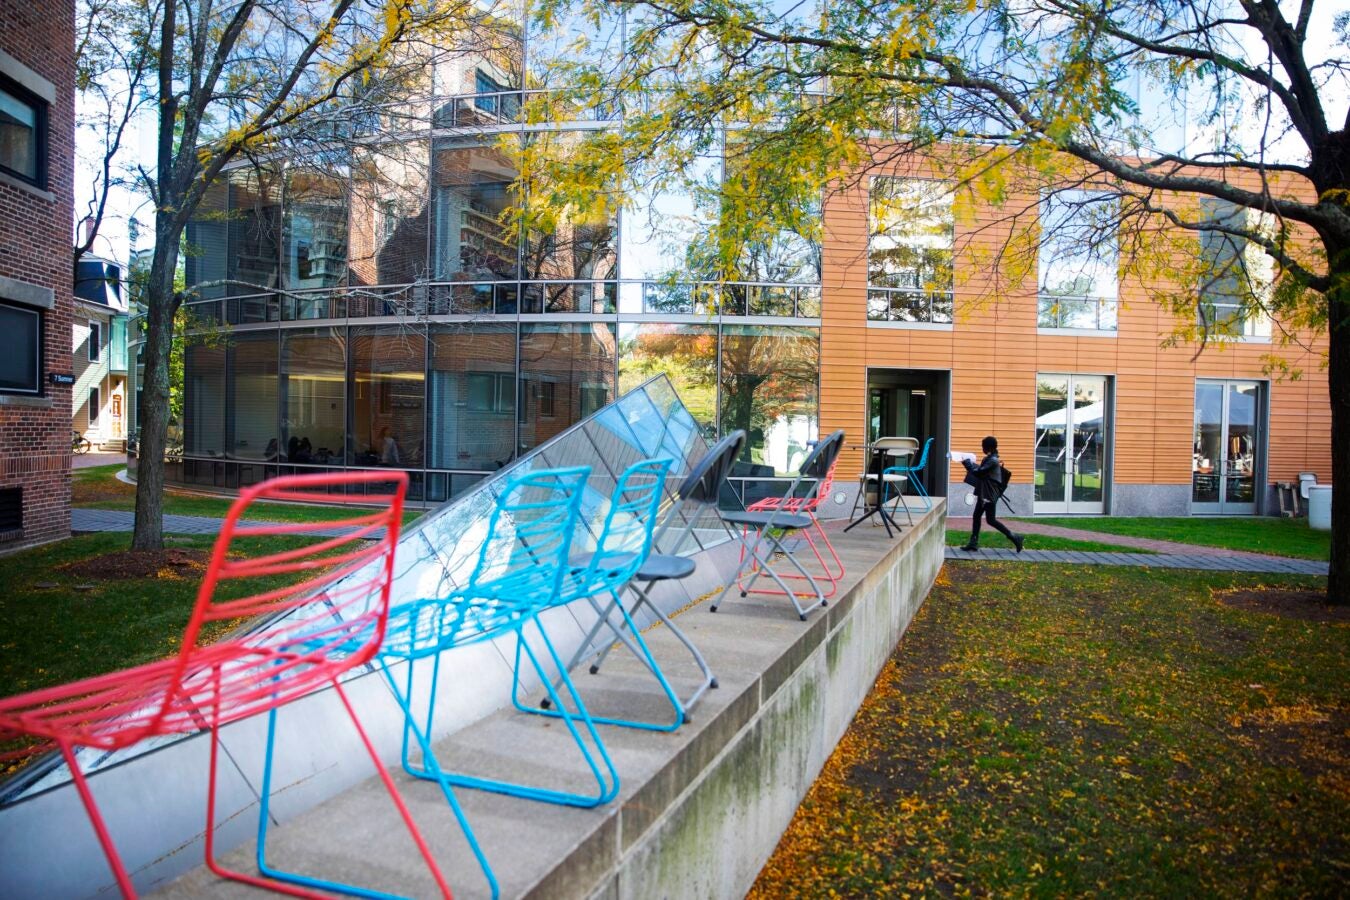 Chairs linne up in the CGIS Knafel Building courtyard.